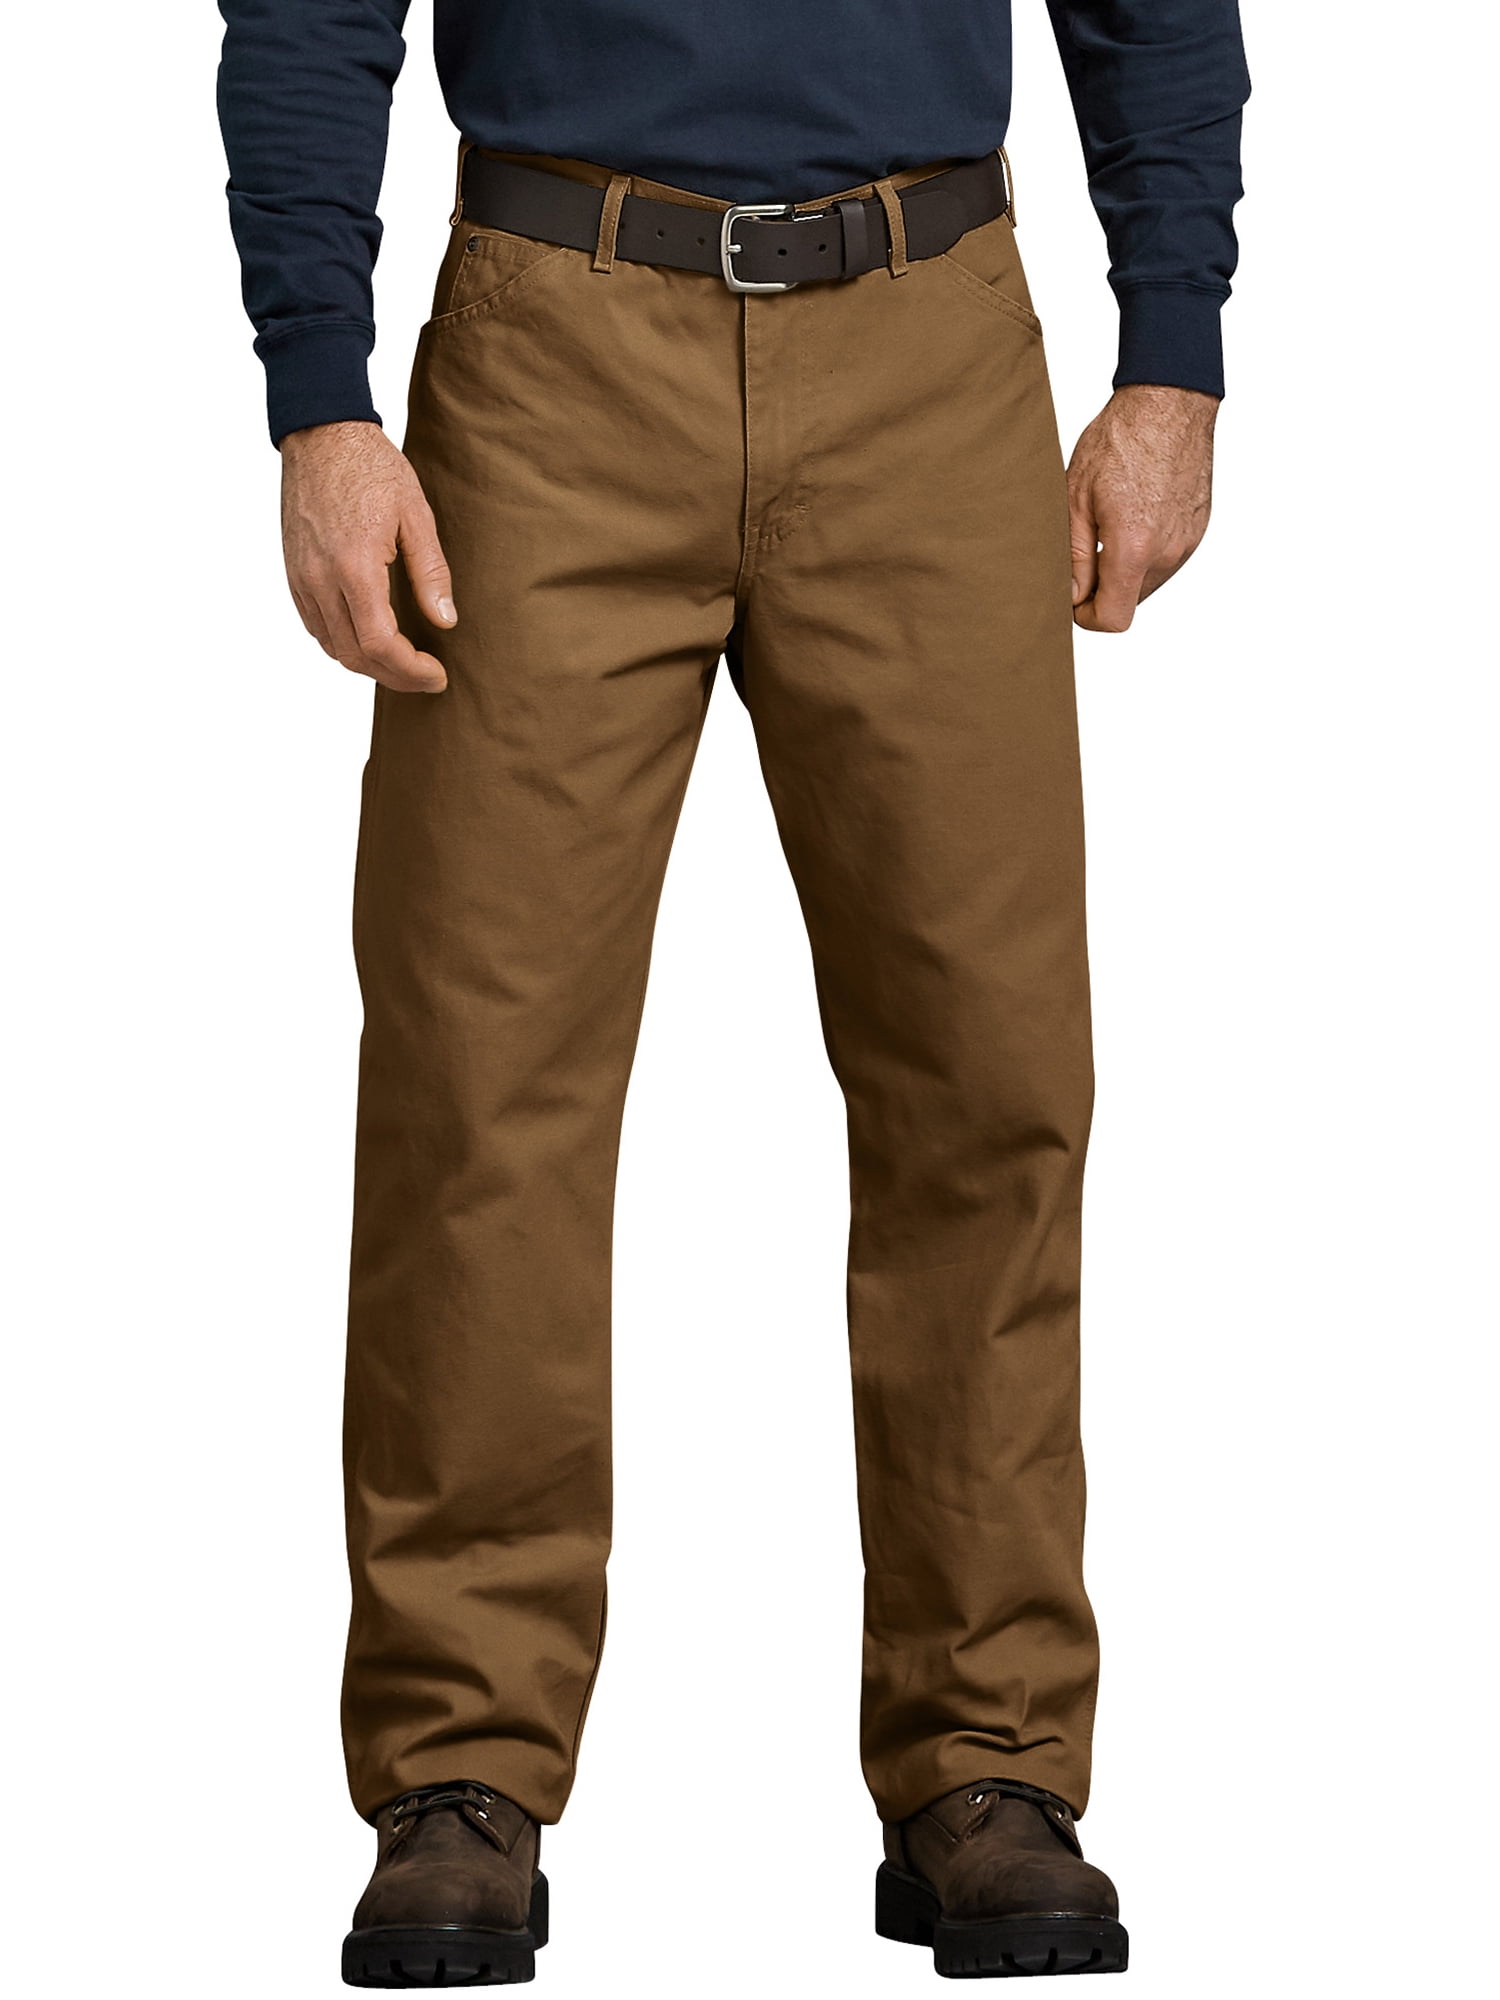 dickie relaxed fit carpenter jeans